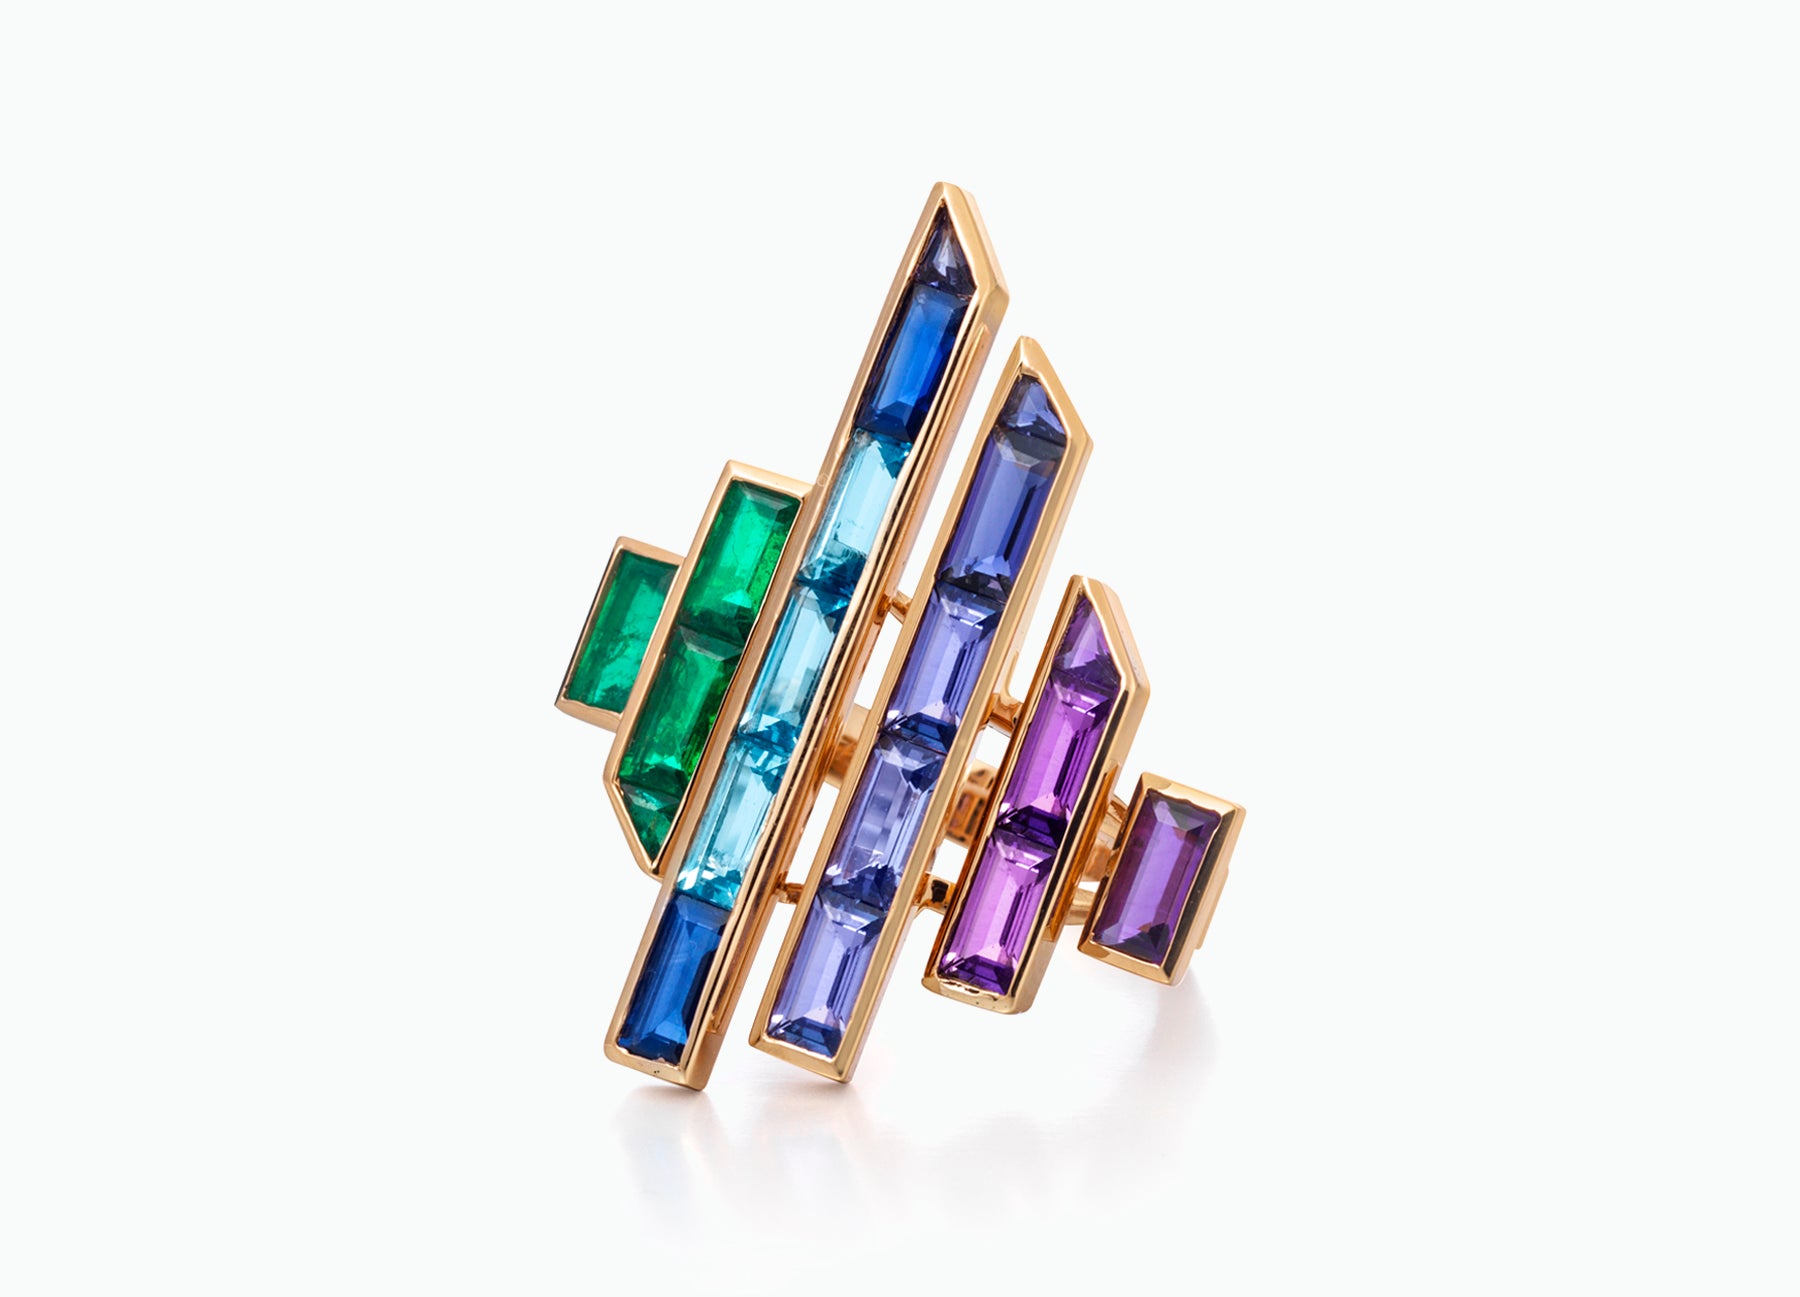 Blade runner rainbow ring in 18K rose gold by Tomasz Donocik top view